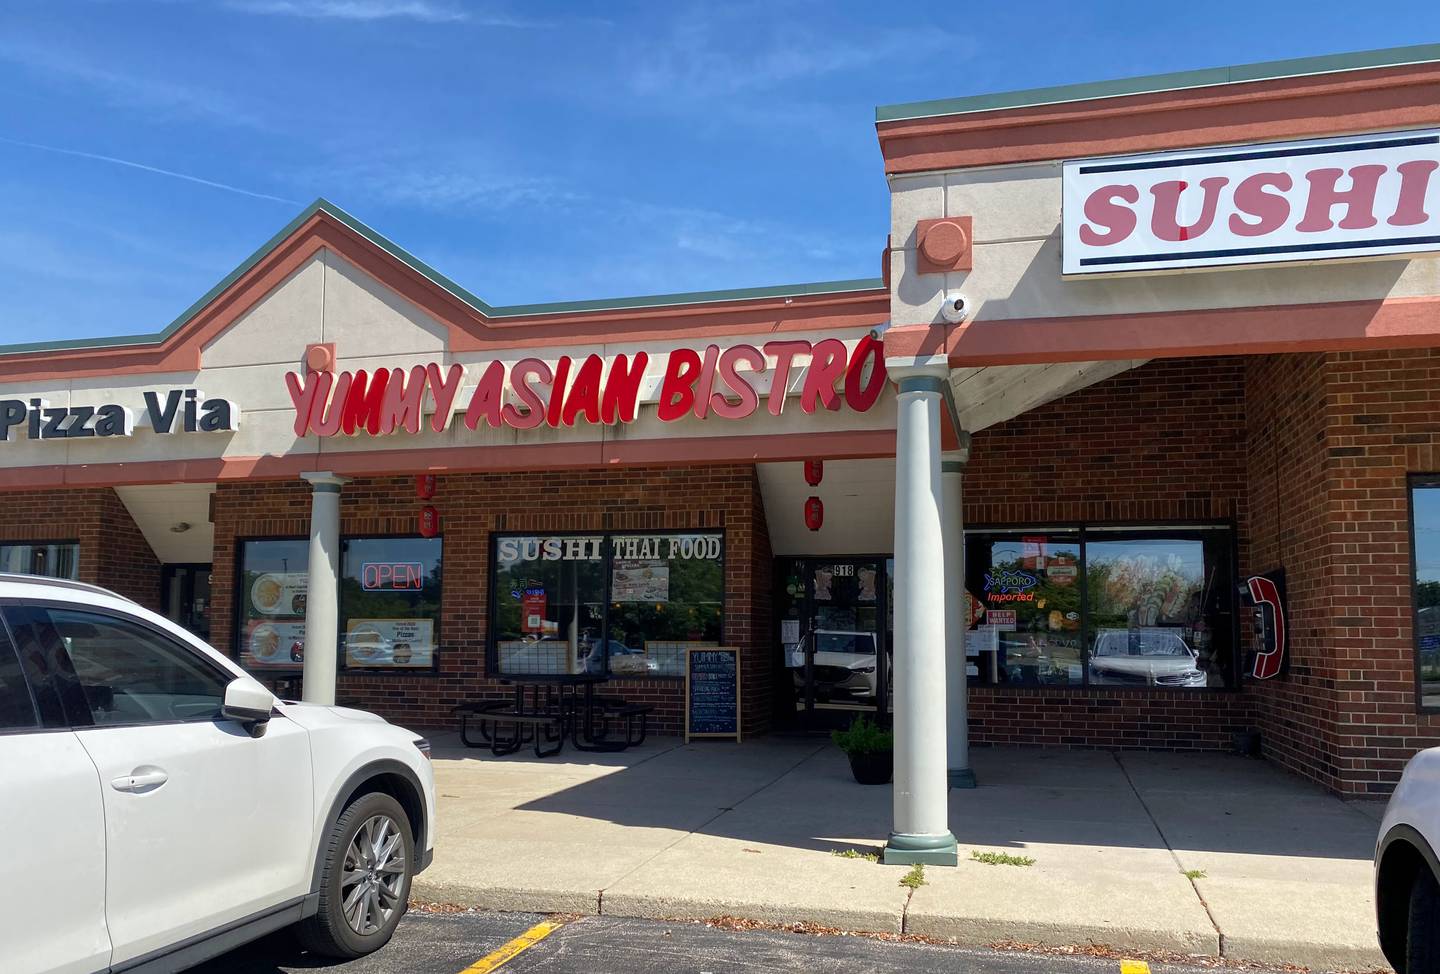 Yummy Asian Bistro offers Japanese, Thai and Chinese dishes and is located in the Stone Hill Center at Northwest Highway and Route 22 in Fox River Grove.